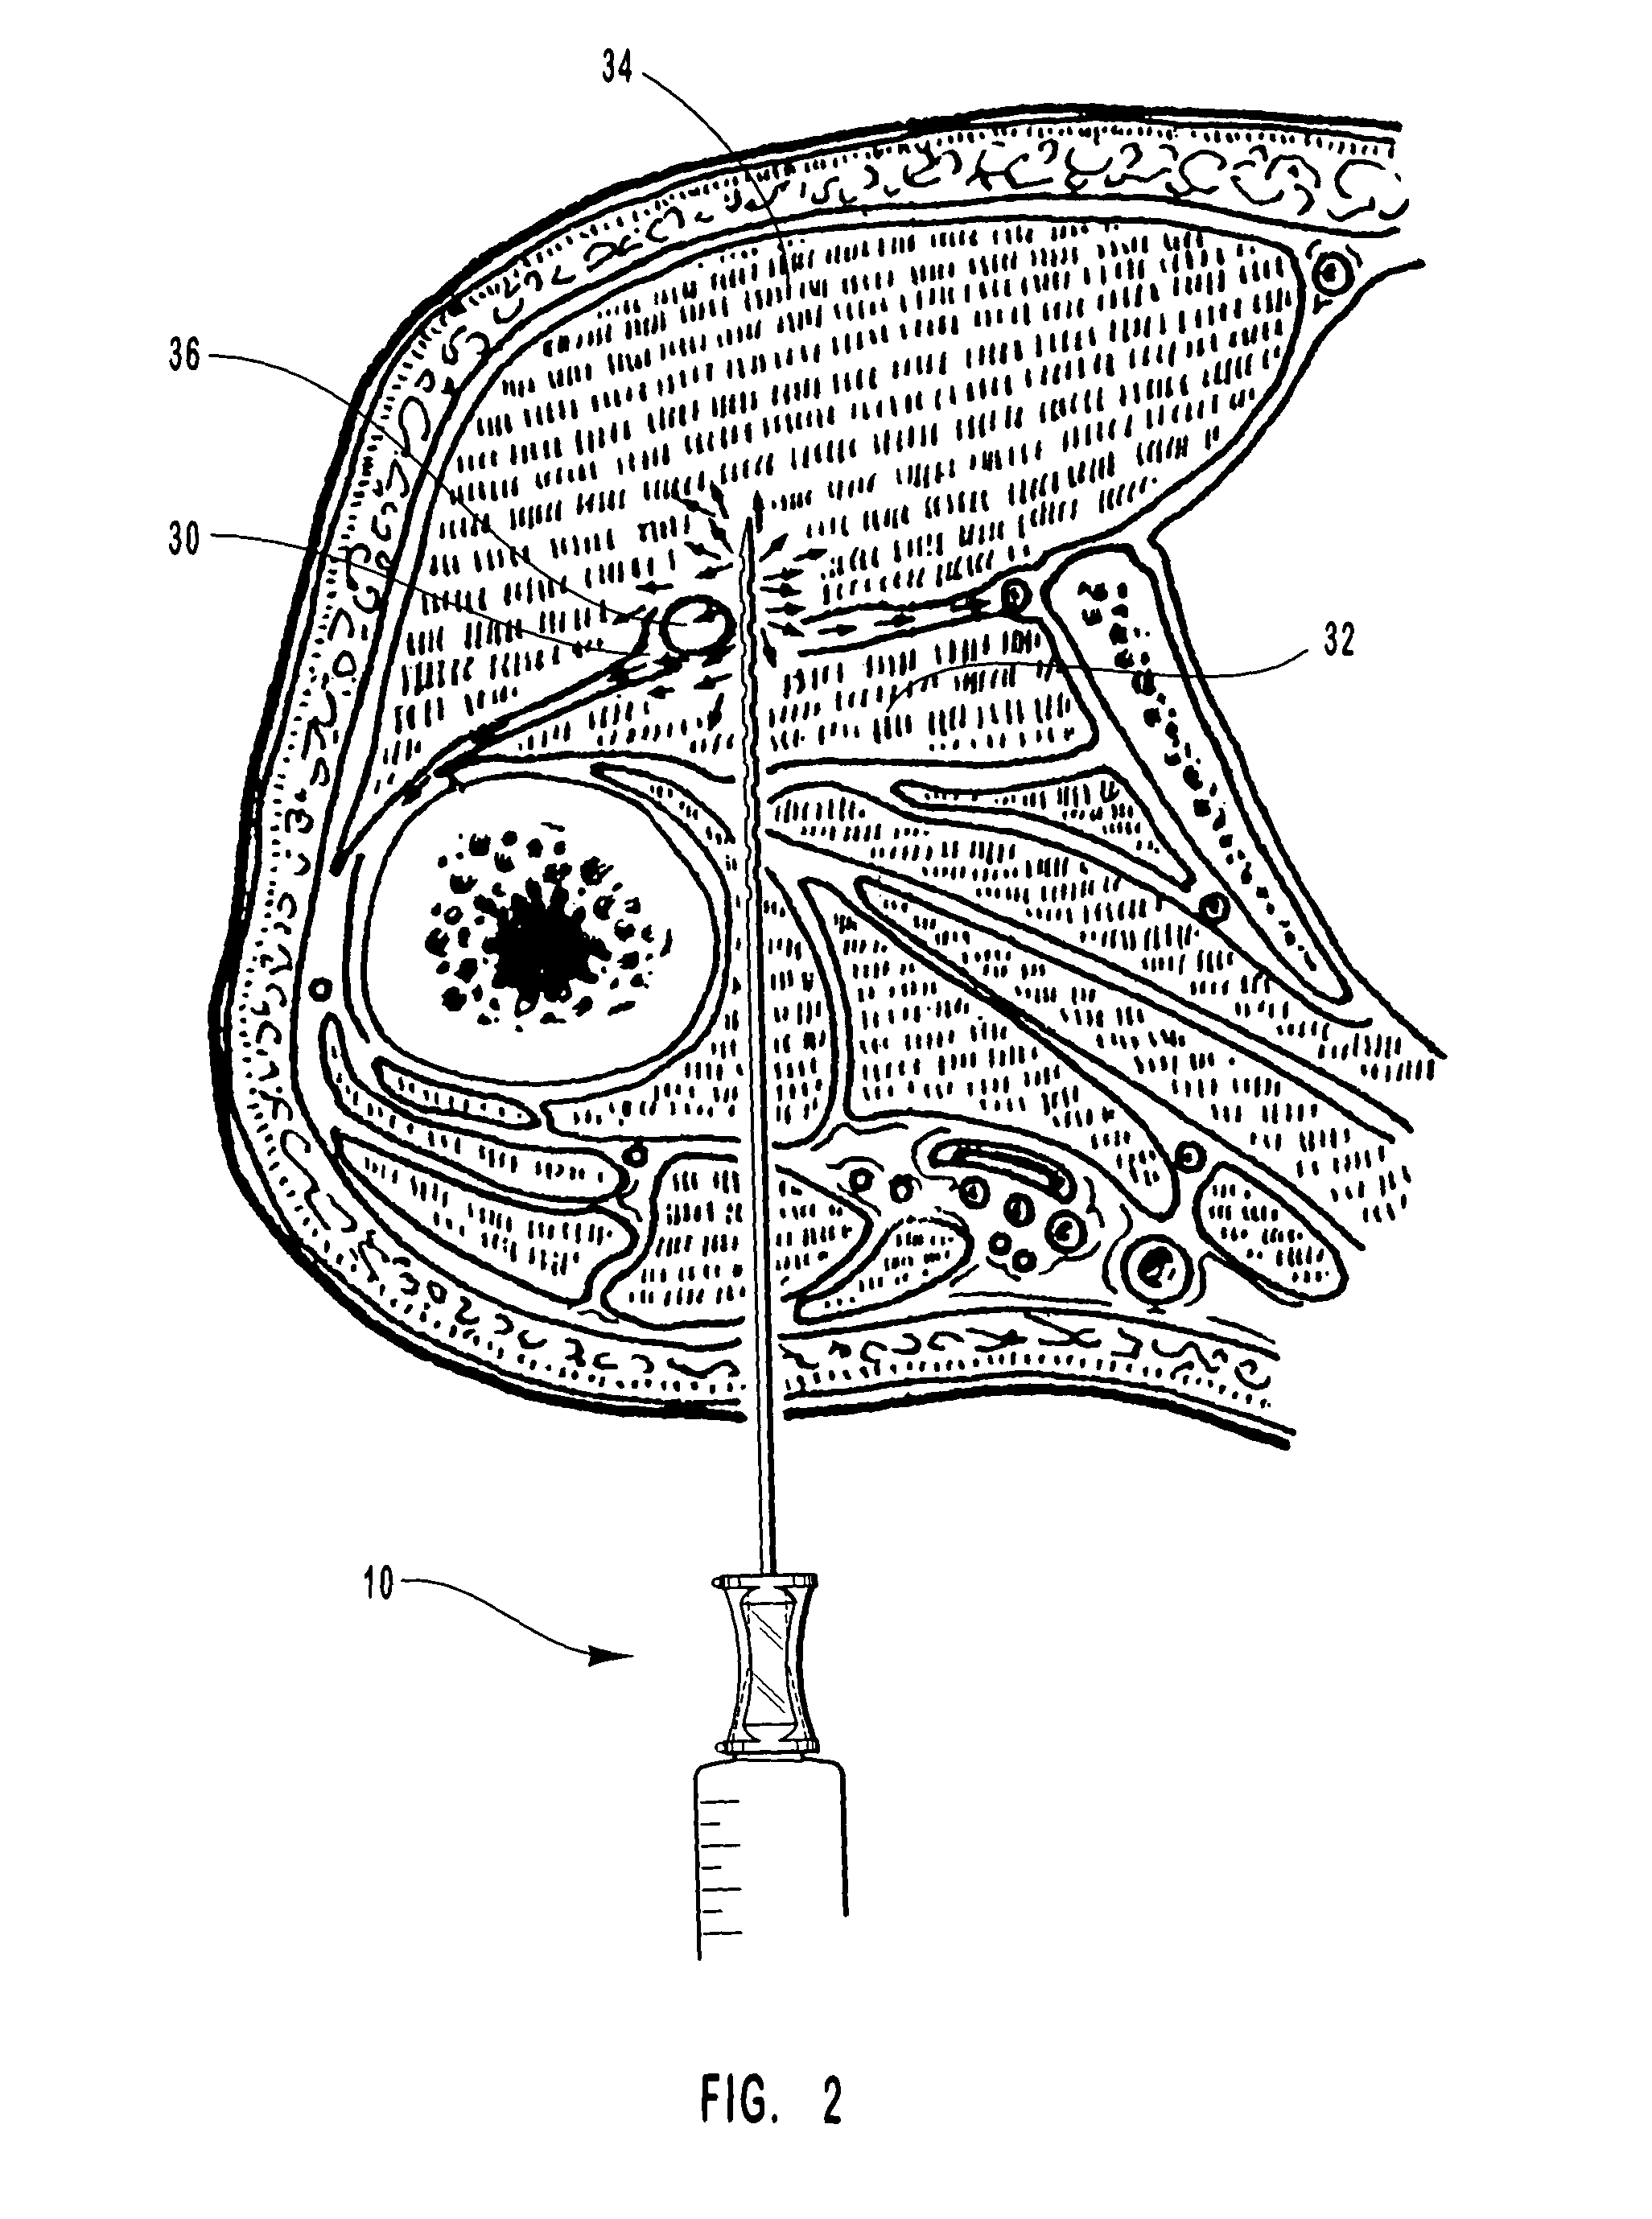 Fenestrated peripheral nerve block needle and method for using the same